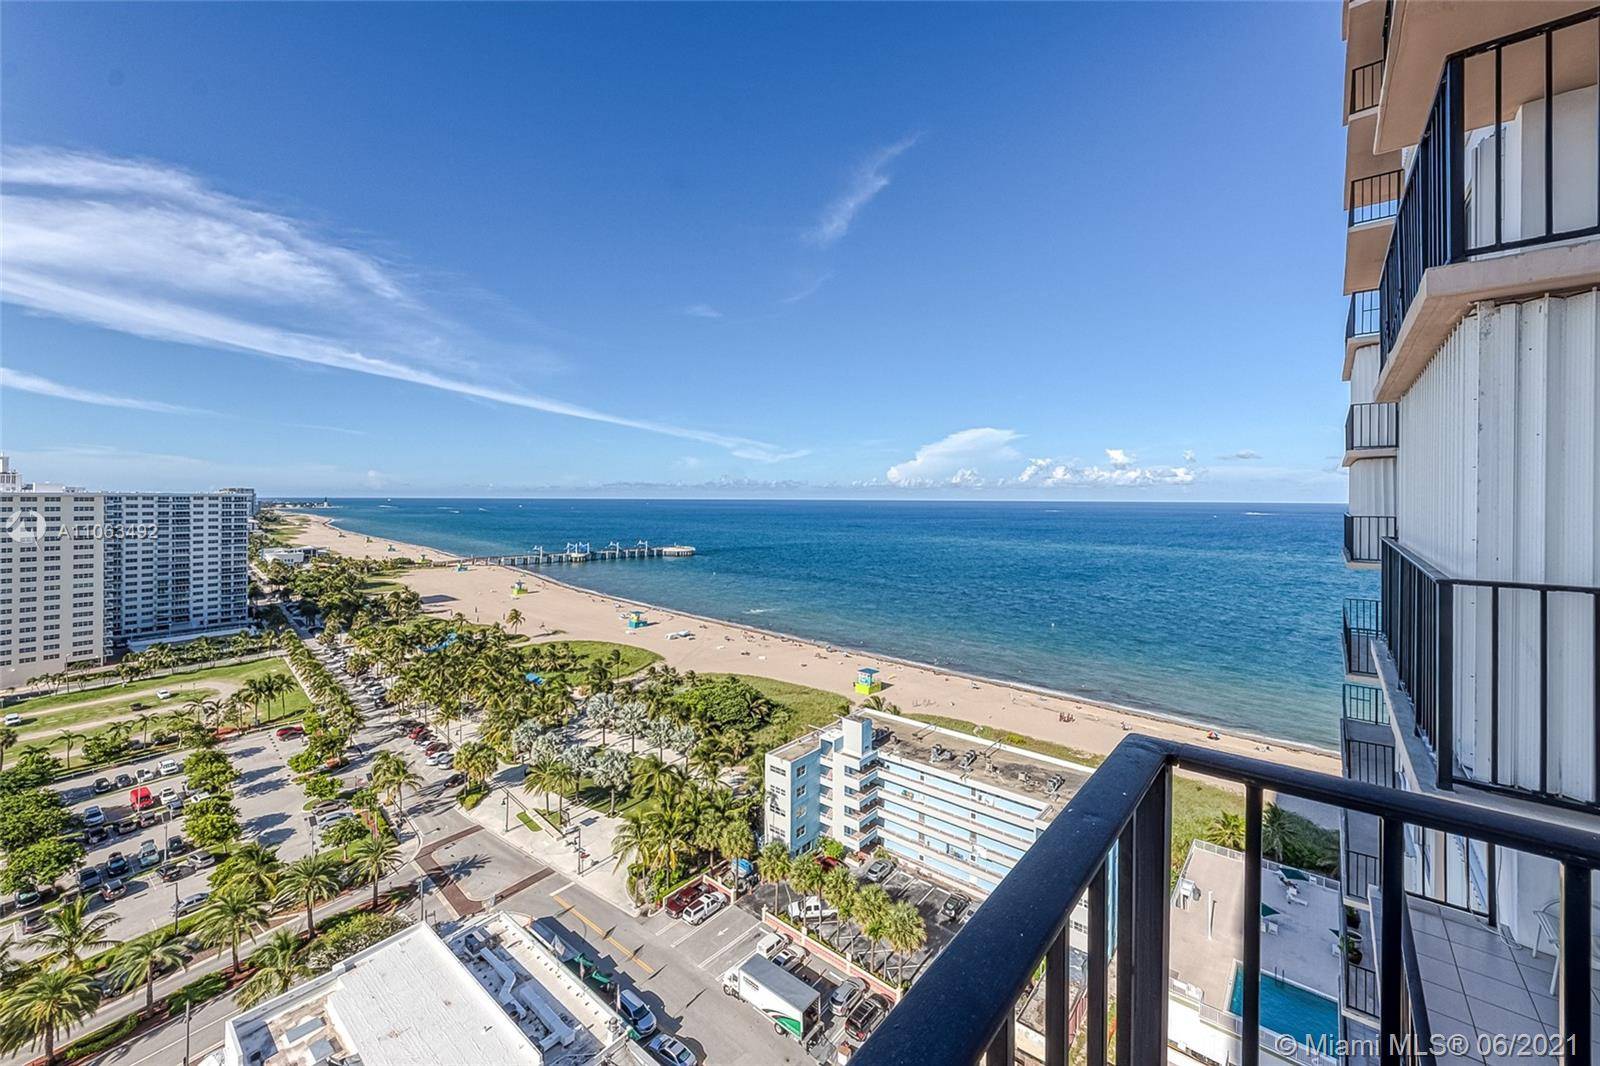 Wake up to expansive Ocean views every day !